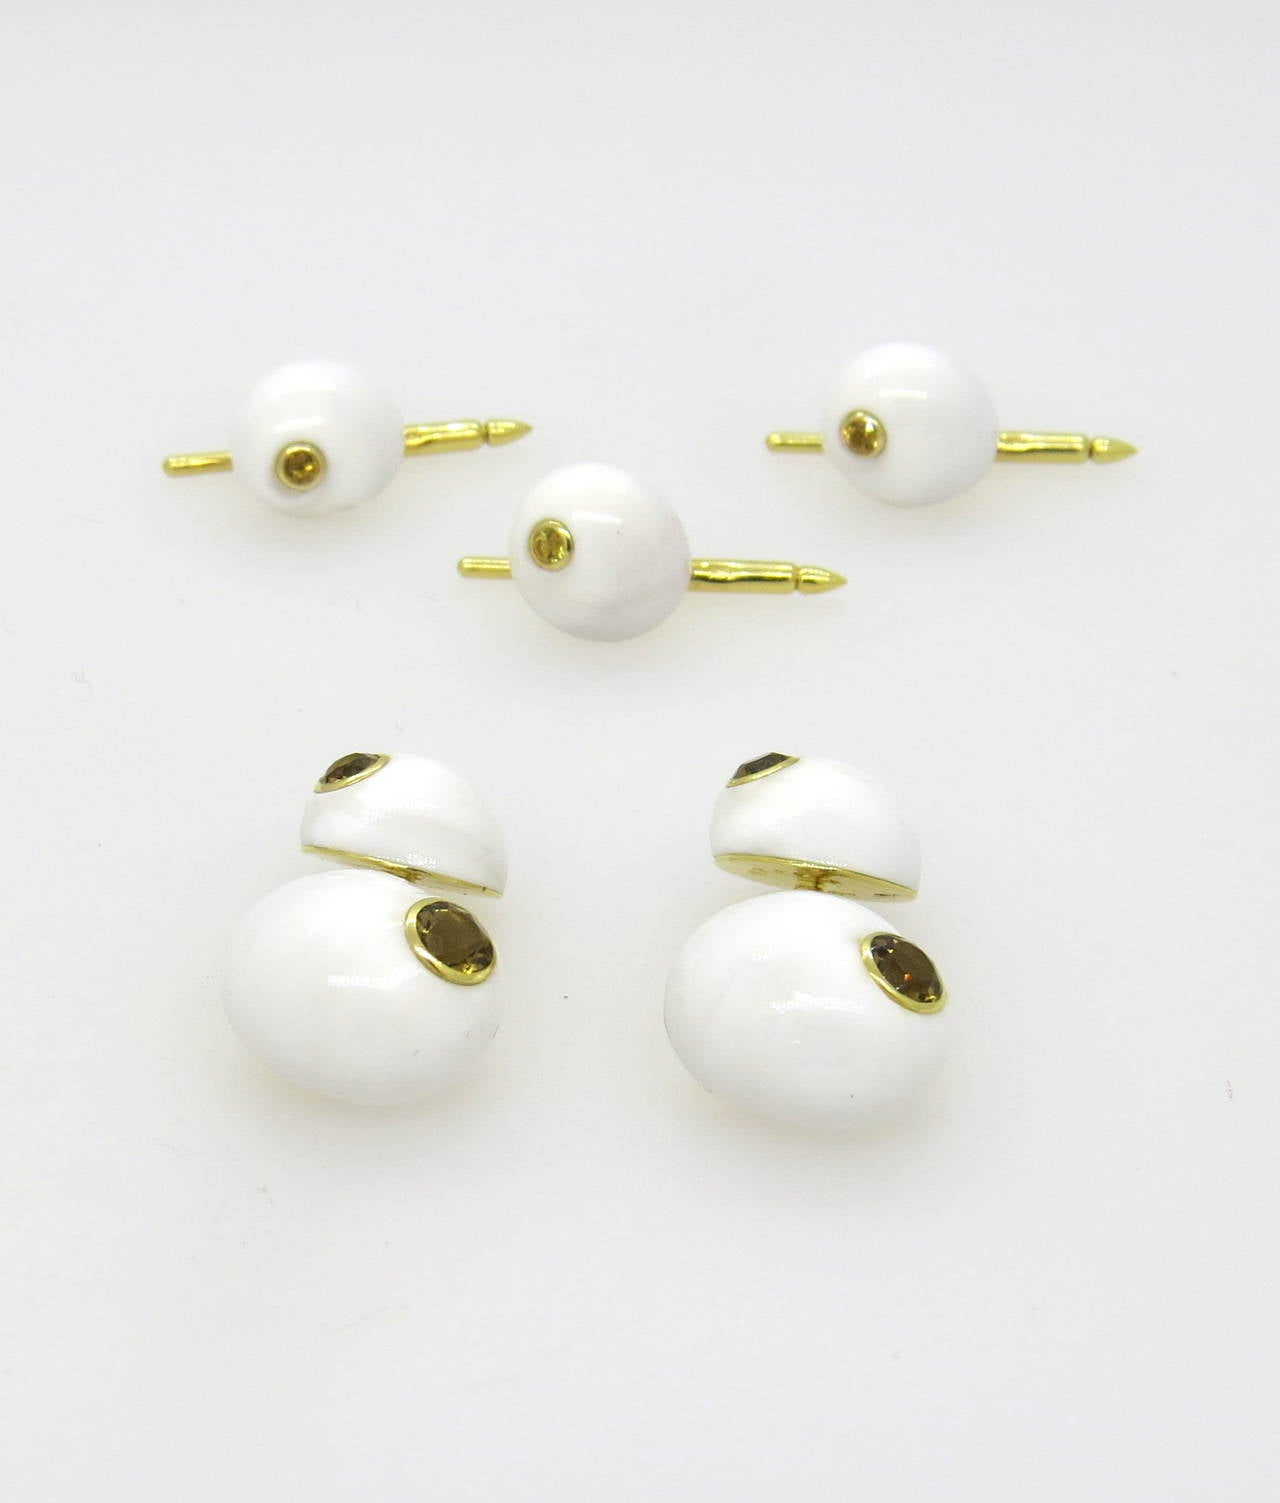 An 18k yellow gold cufflink and stud set made of shells set with citrines.  The cufflinks measure 17mm x 15mm and the studs measure 12.8mm x 11.4mm.  The weight of the set is 19 grams.